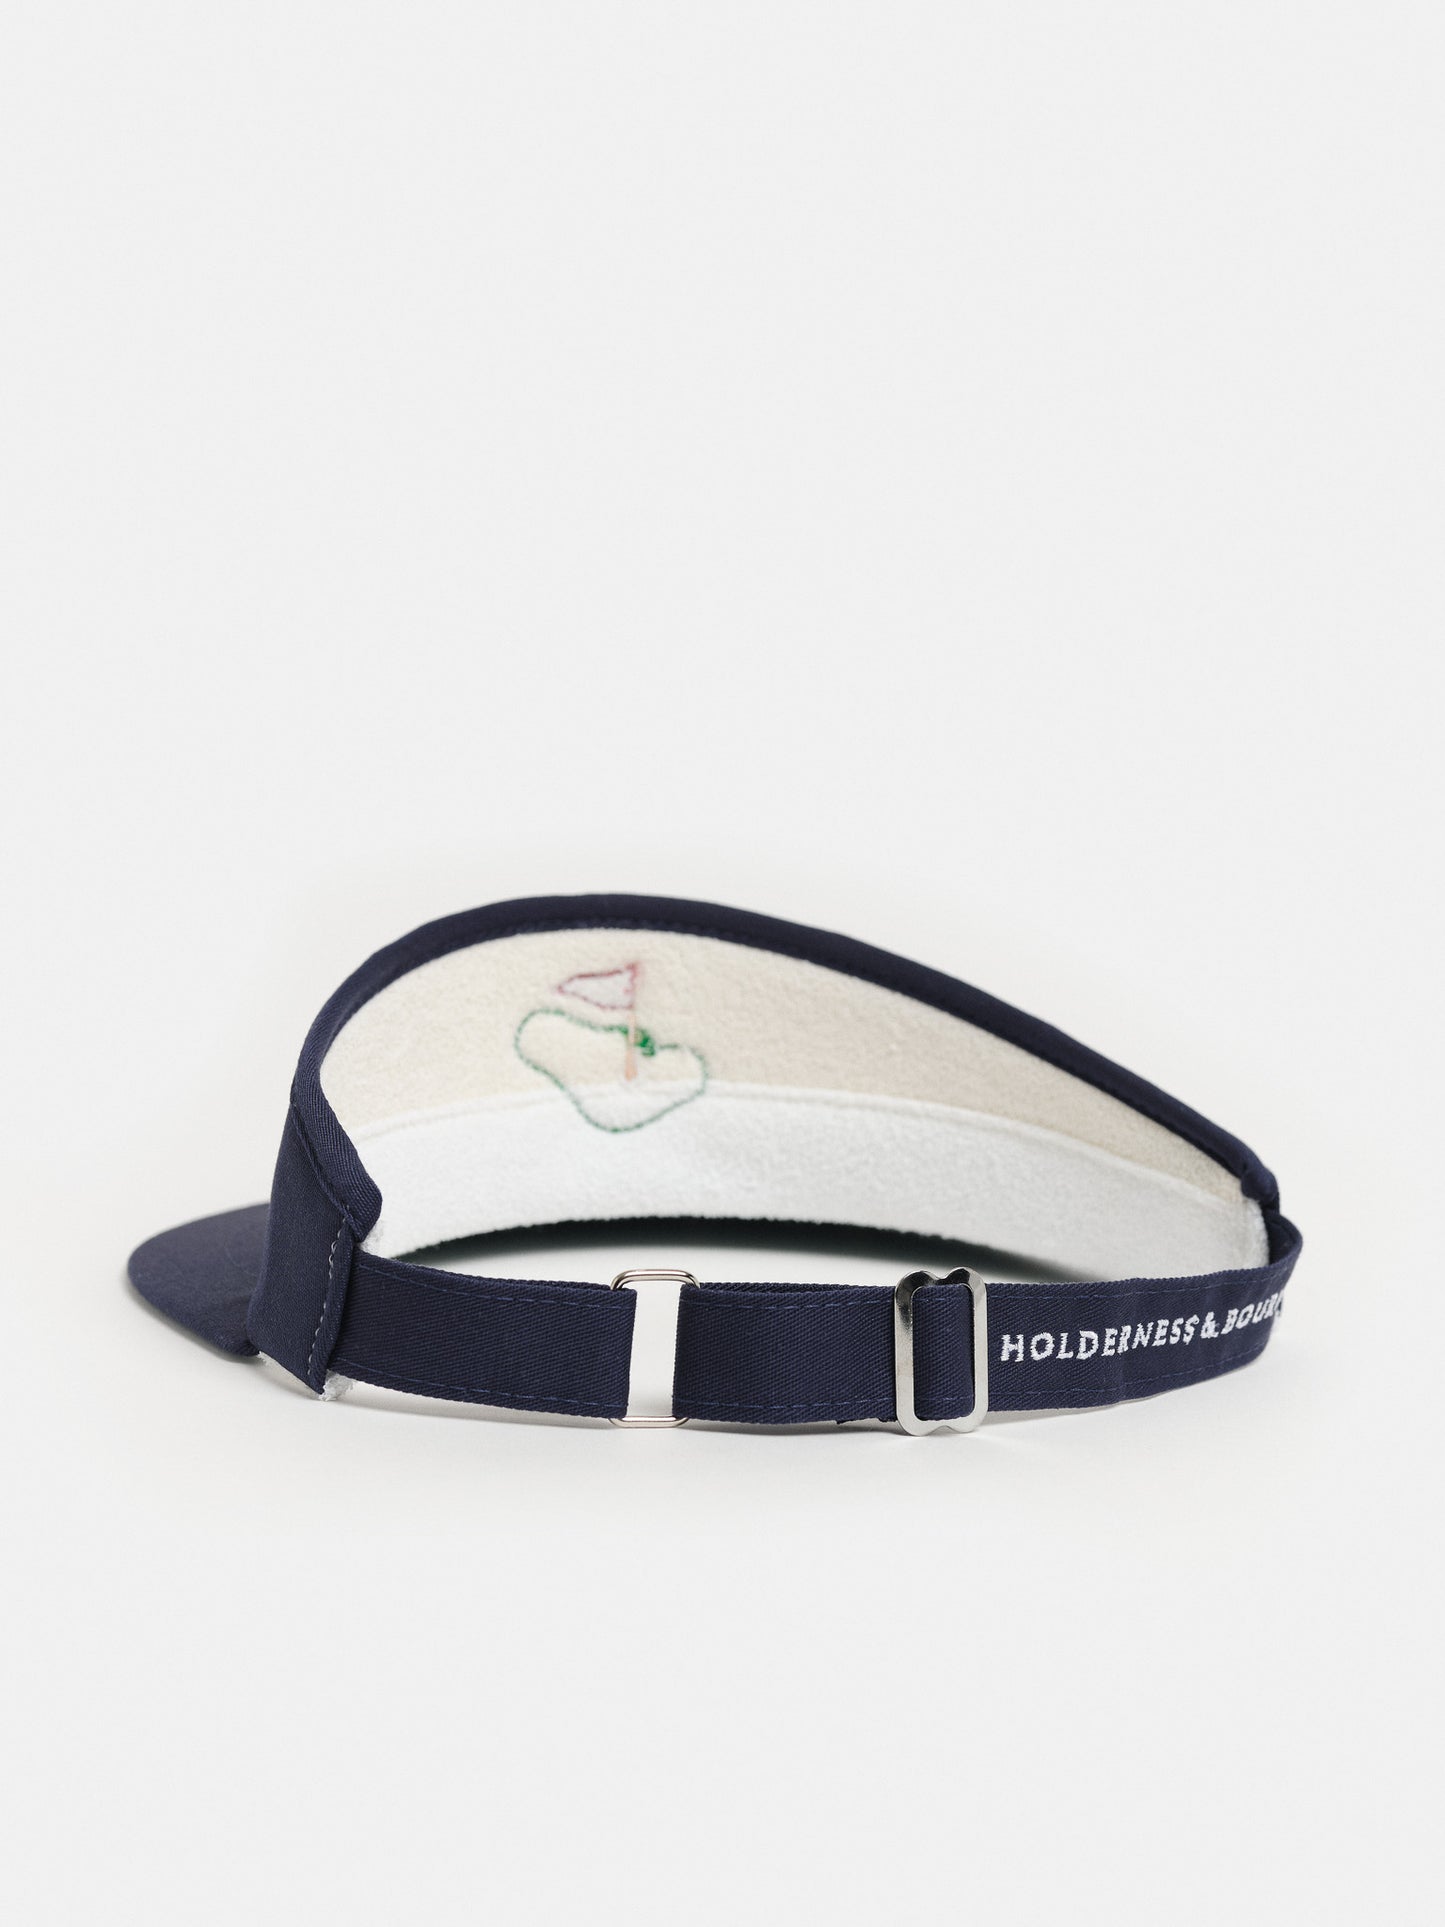 ACL Tour Visor in Navy